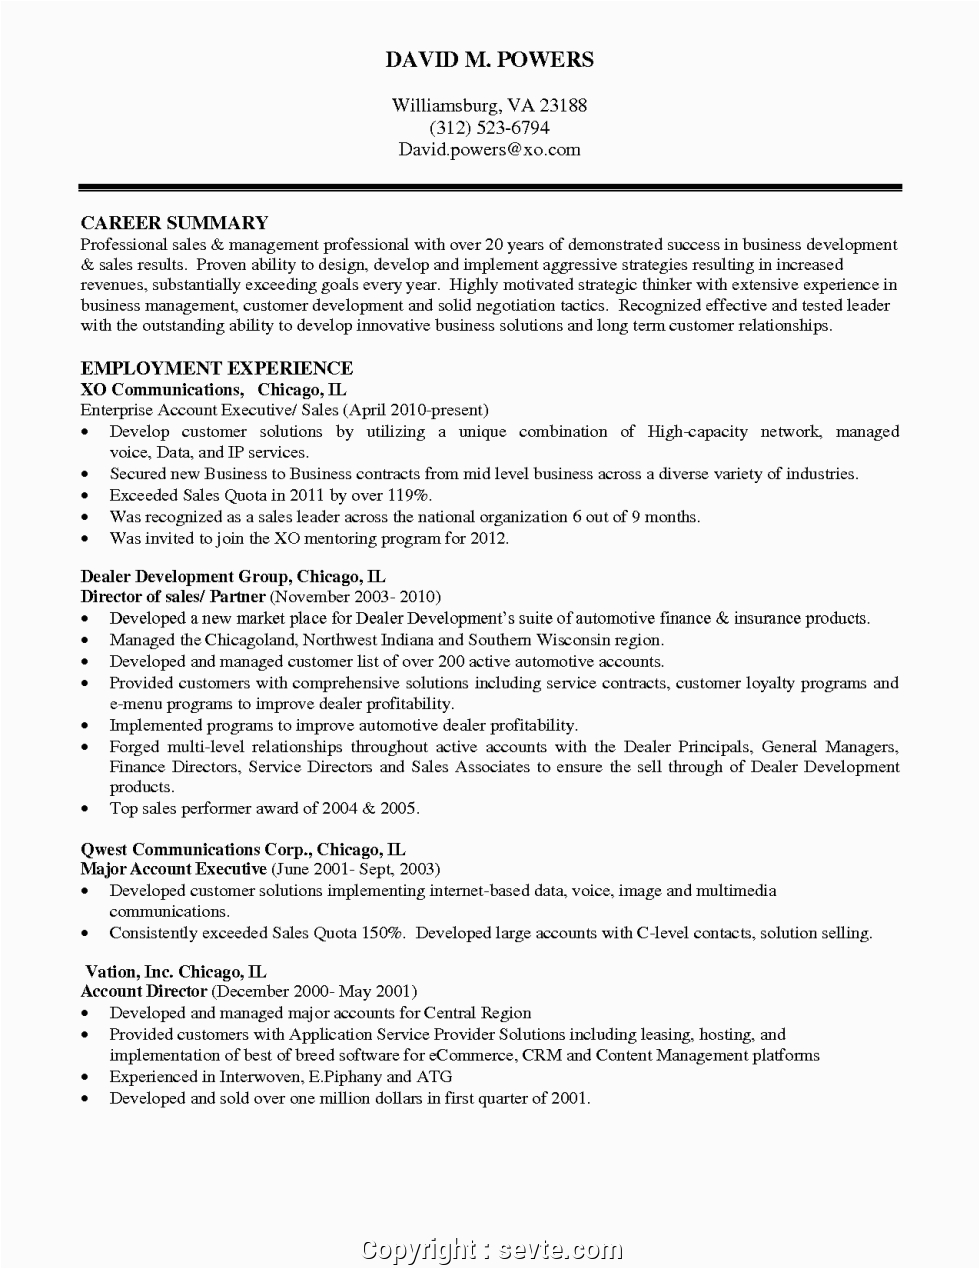 Professional Summary Resume Sample for Manager Styles Sales Manager Professional Summary 100 Sample Sales